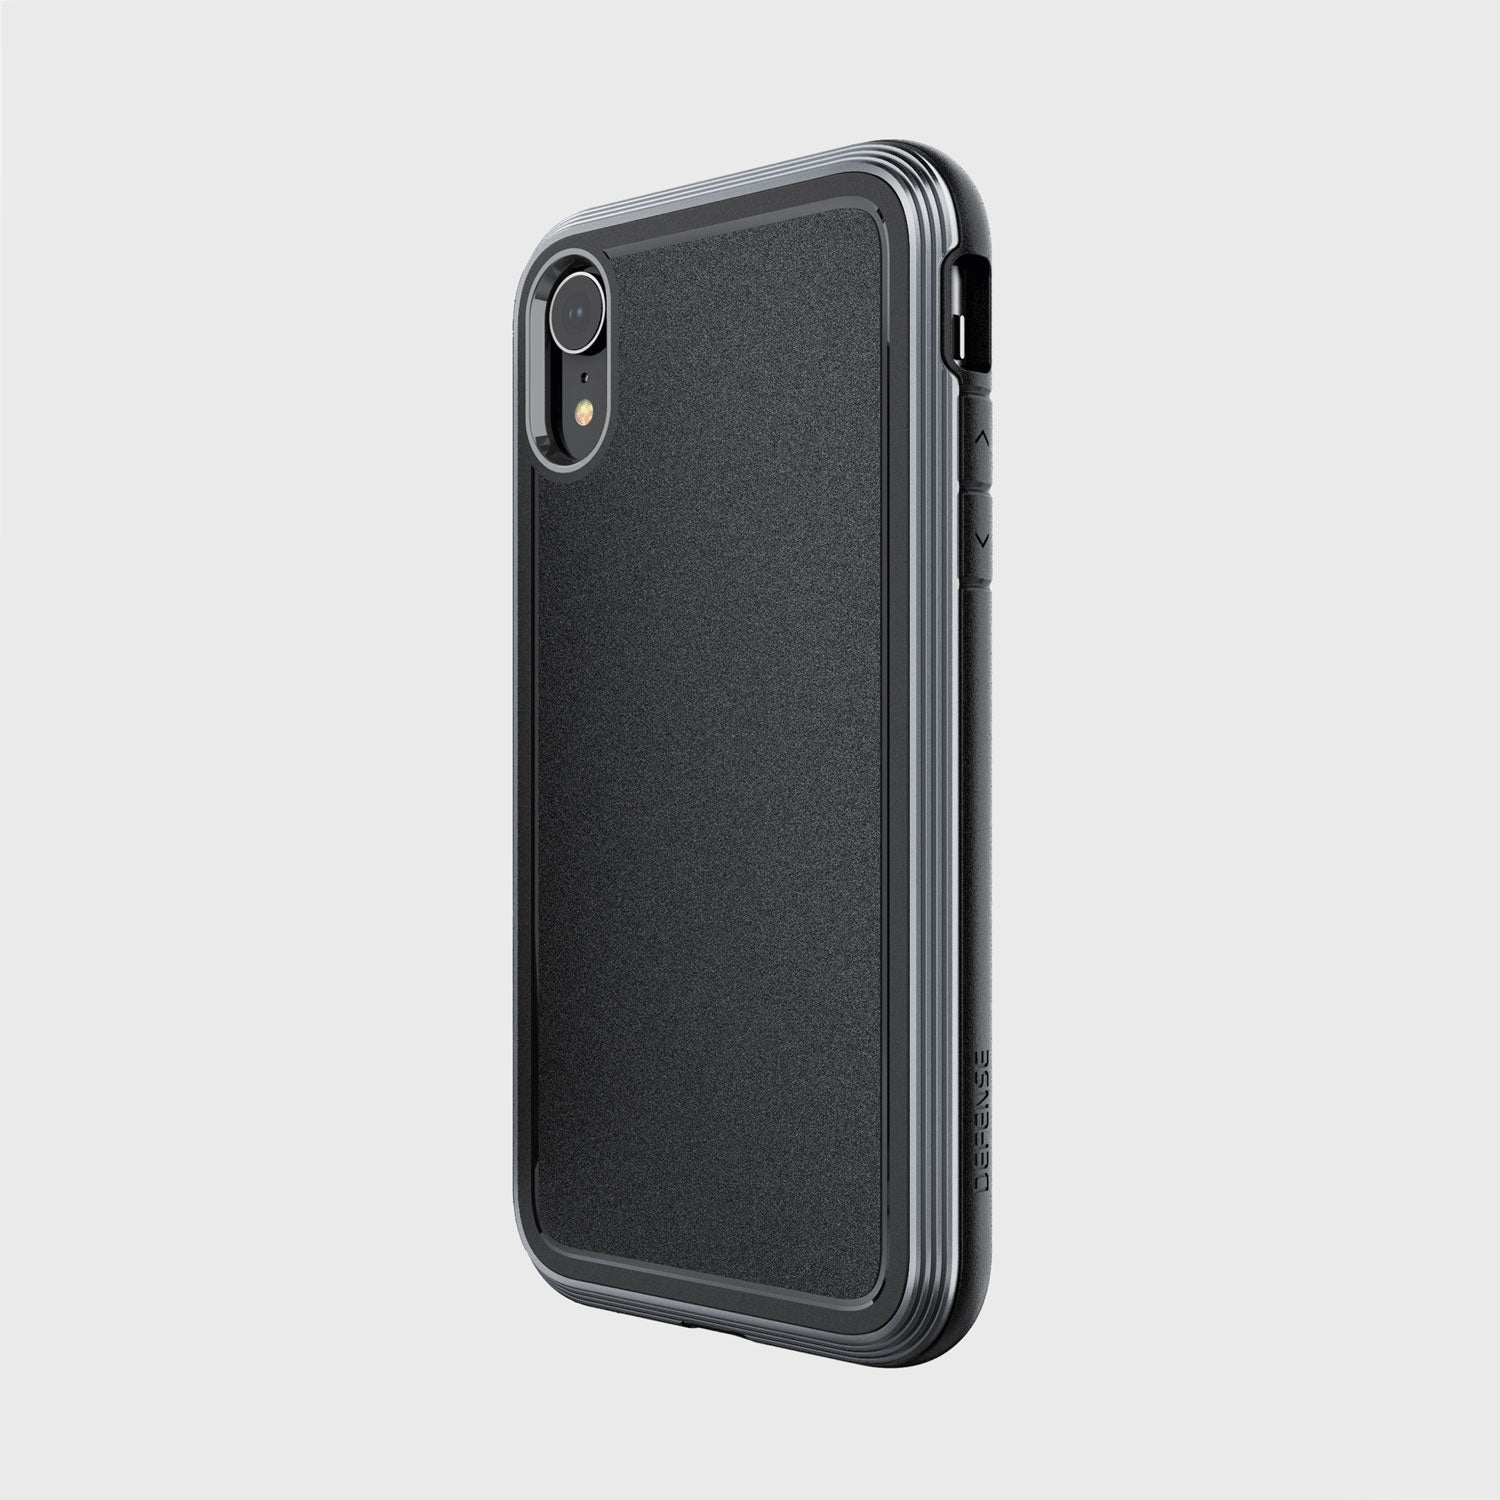 The sleek Raptic ULTRA case provides reliable device protection for your iPhone XR. Against a crisp white background, the black case complements the stylish design of your phone.